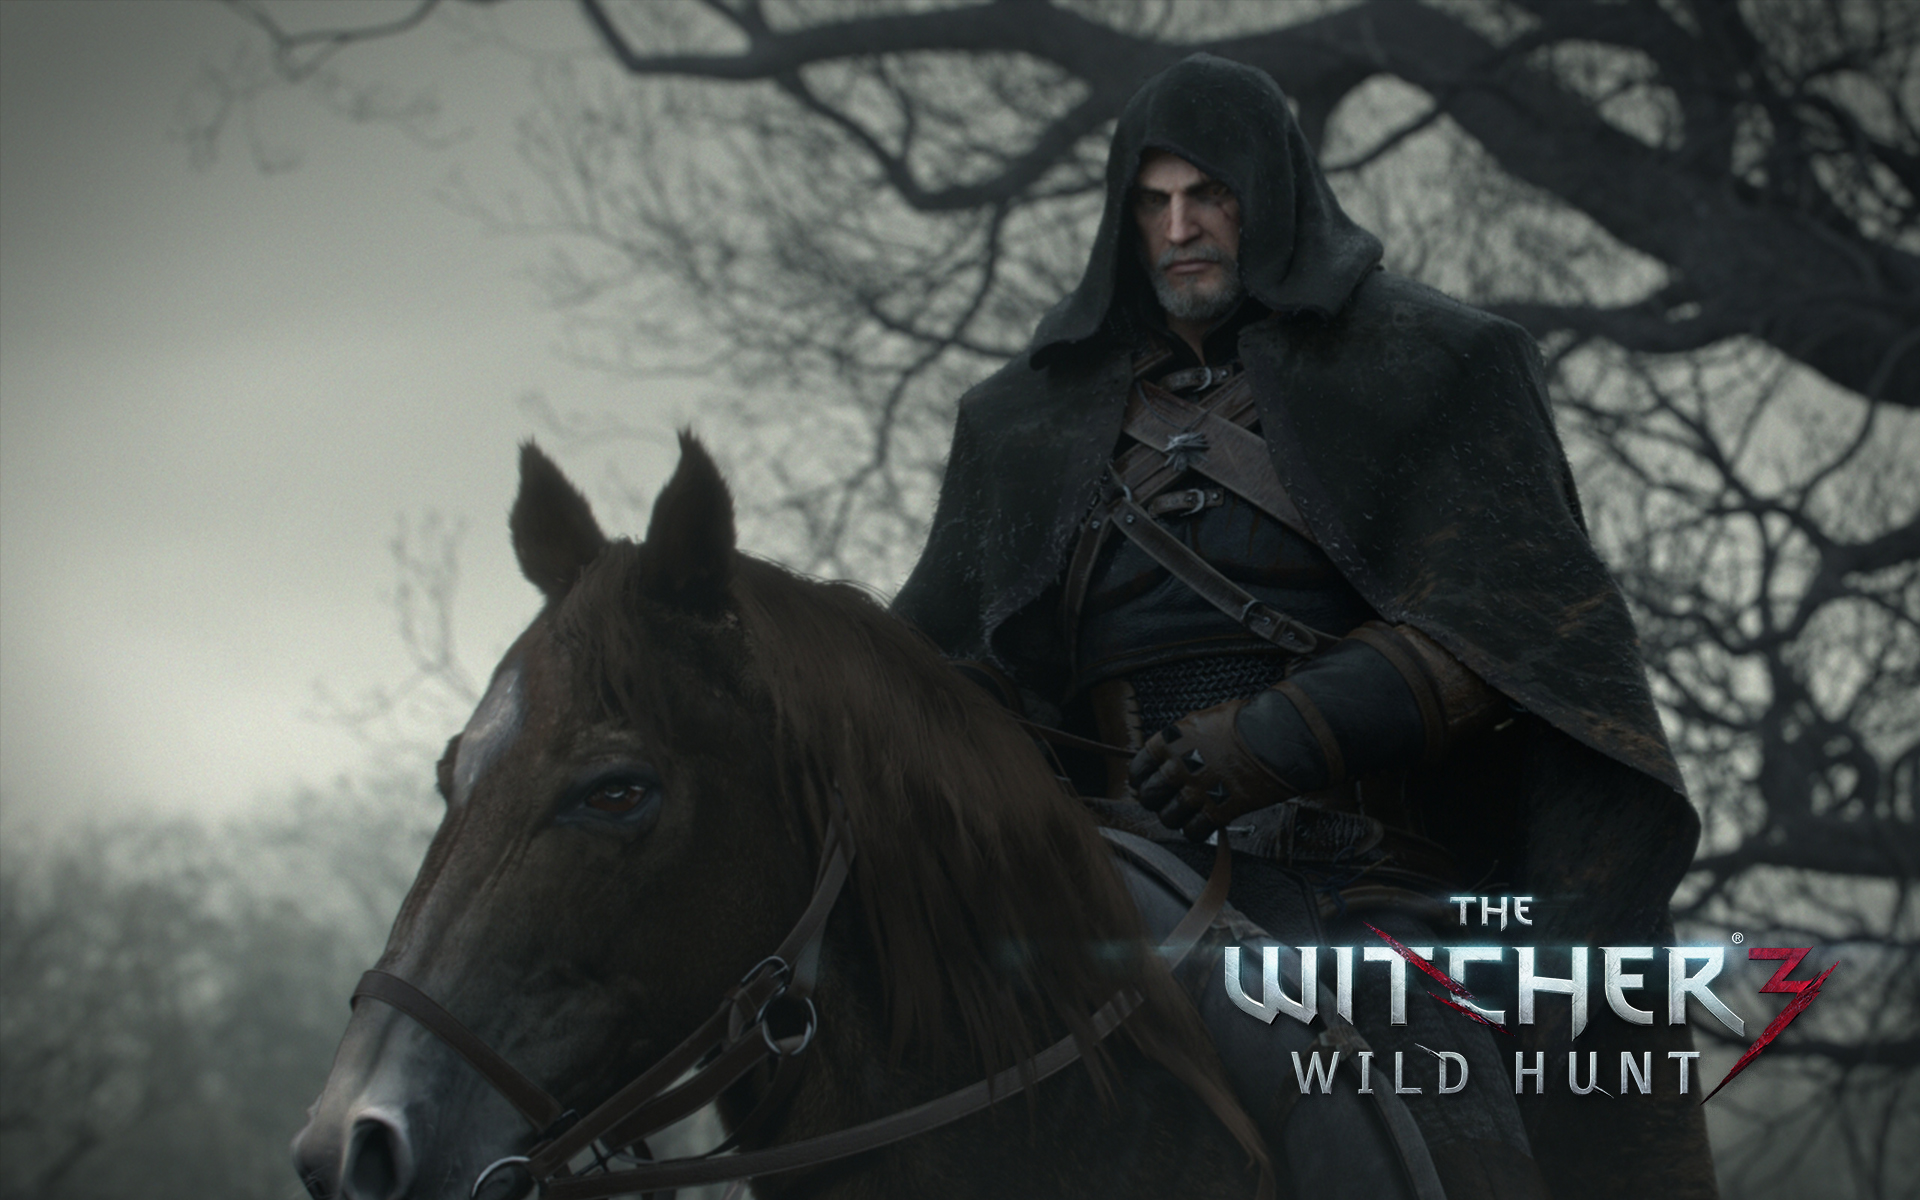 Wallpaperpapel de parede do The Witcher 3 Wild Hunt Resoluo 1920x1200